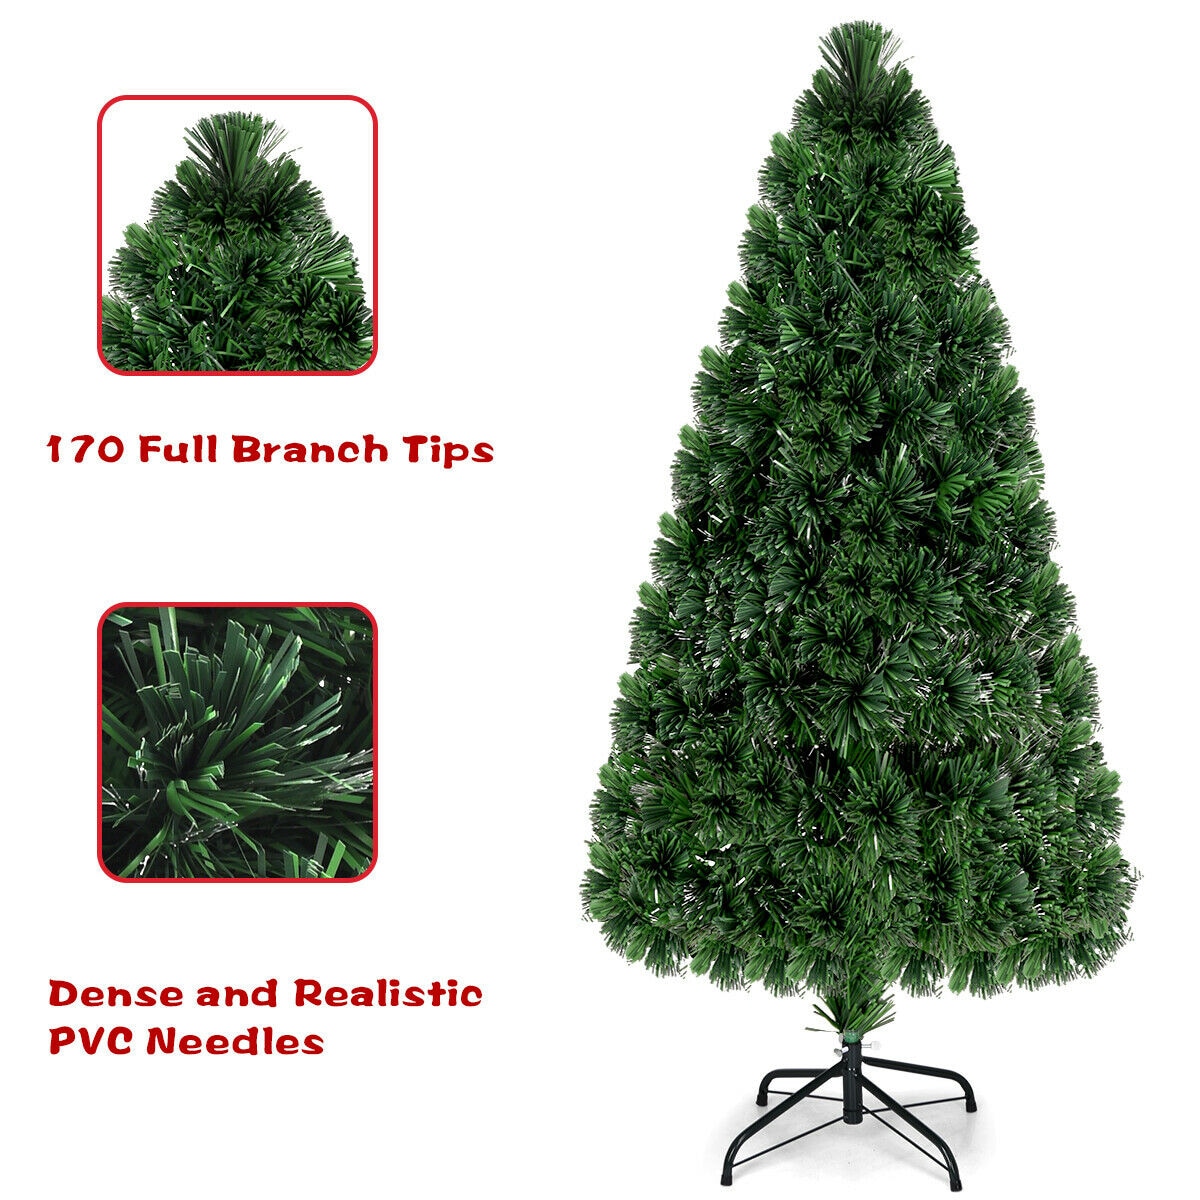 Goplus Our new 5Ft Fiber Optic Artificial Christmas tree is an ideal ...